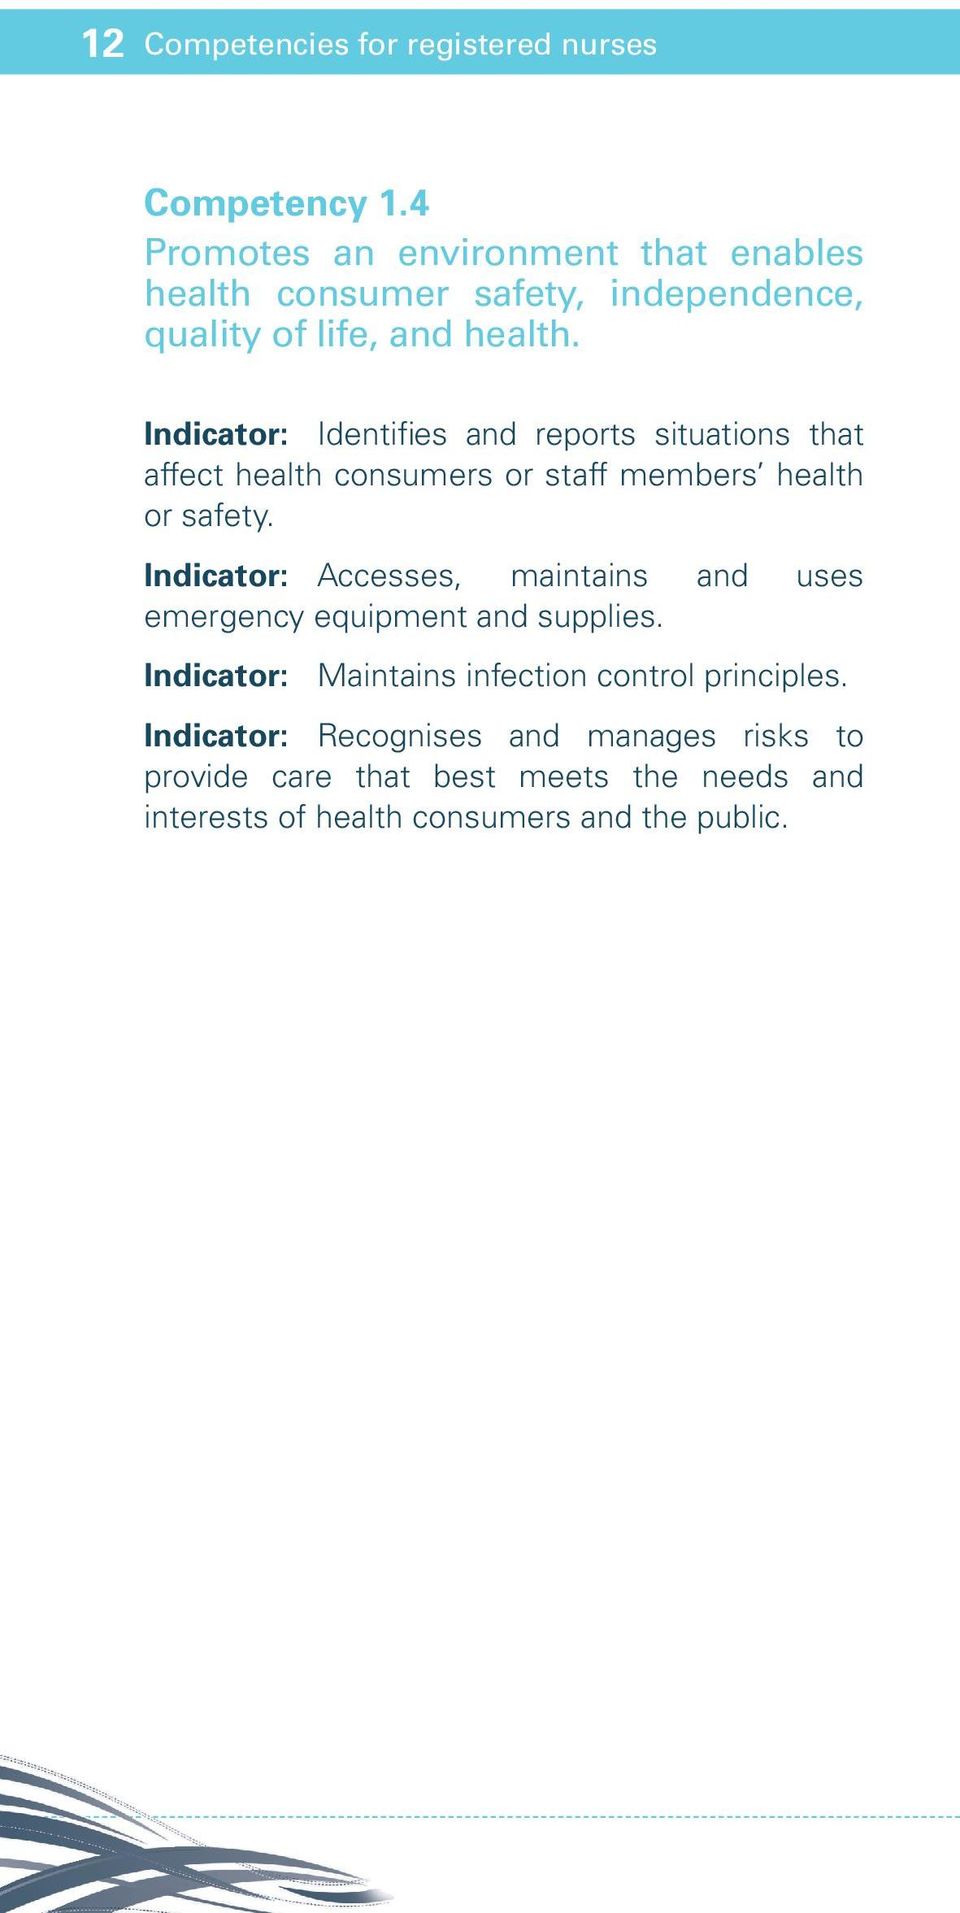 Indicator: Identifies and reports situations that affect health consumers or staff members health or safety.